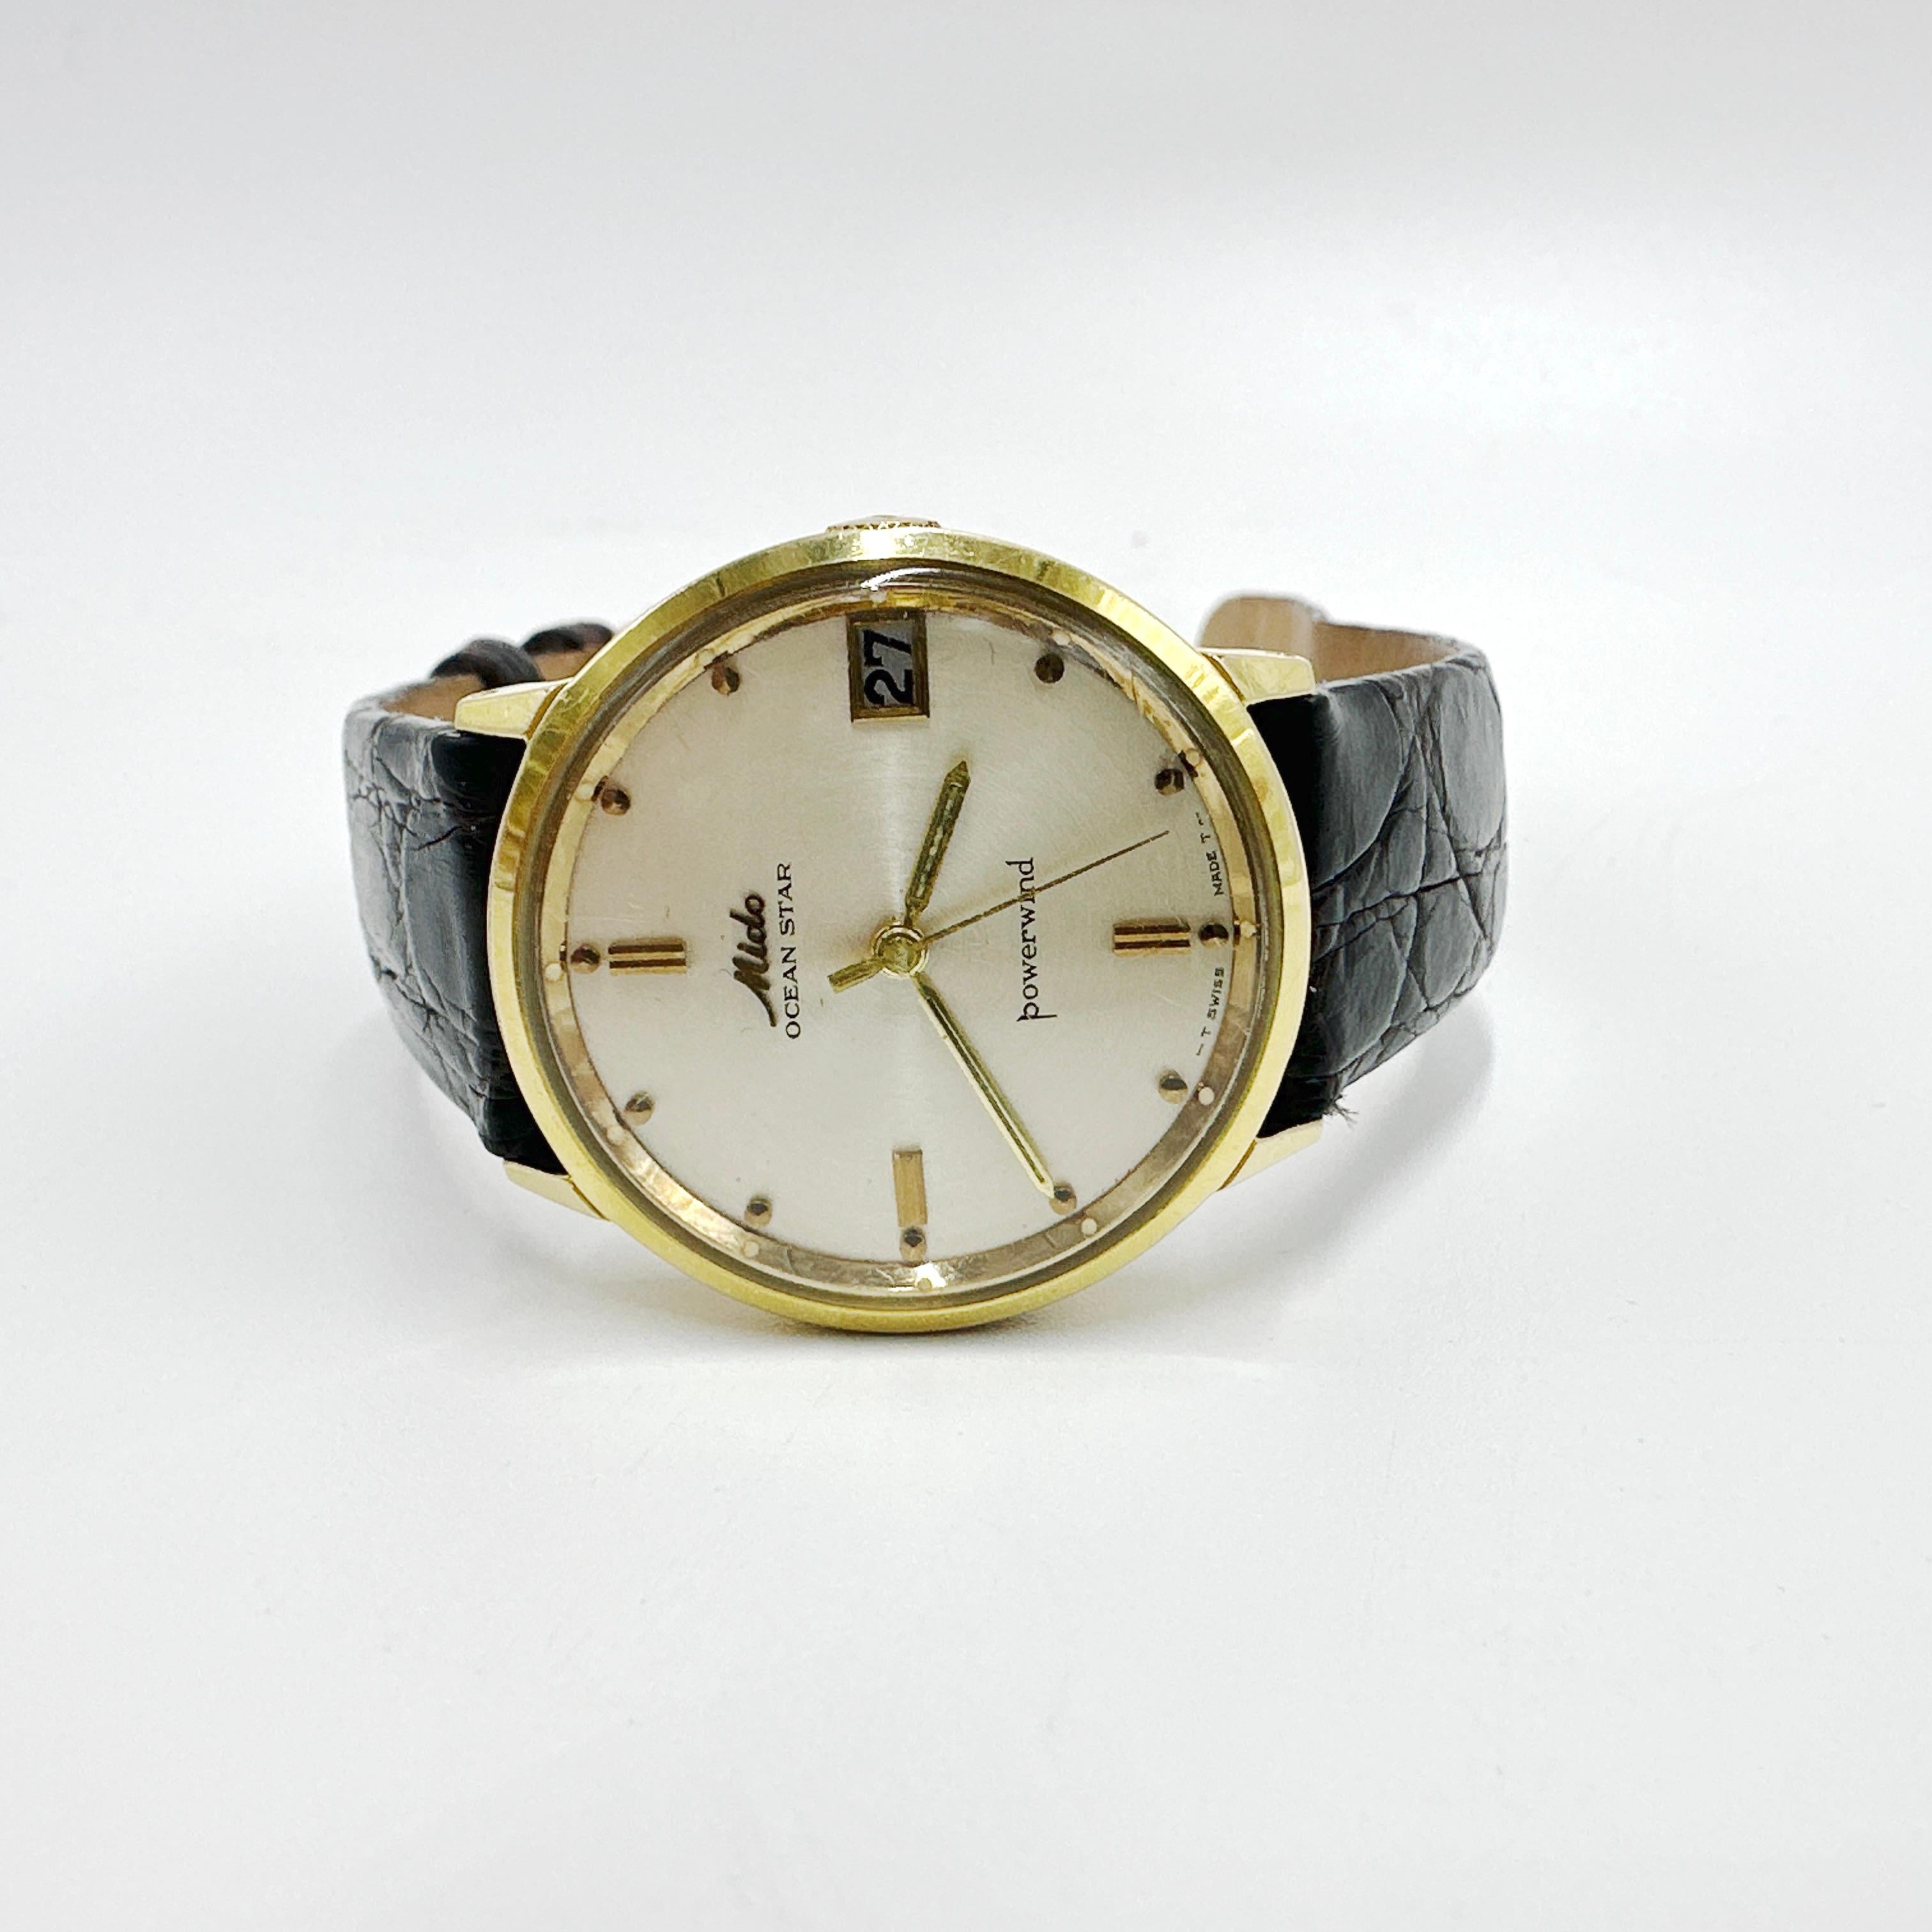 Here is a handsome Gentlemen's 1960s MIDO Ocean Star Powerwind 14k Gold Plated Vintage Swiss Automatic Watch. This automatic Swiss watch has a date feature and is in overall good condition and keeping good time. Strap and buckle are a new